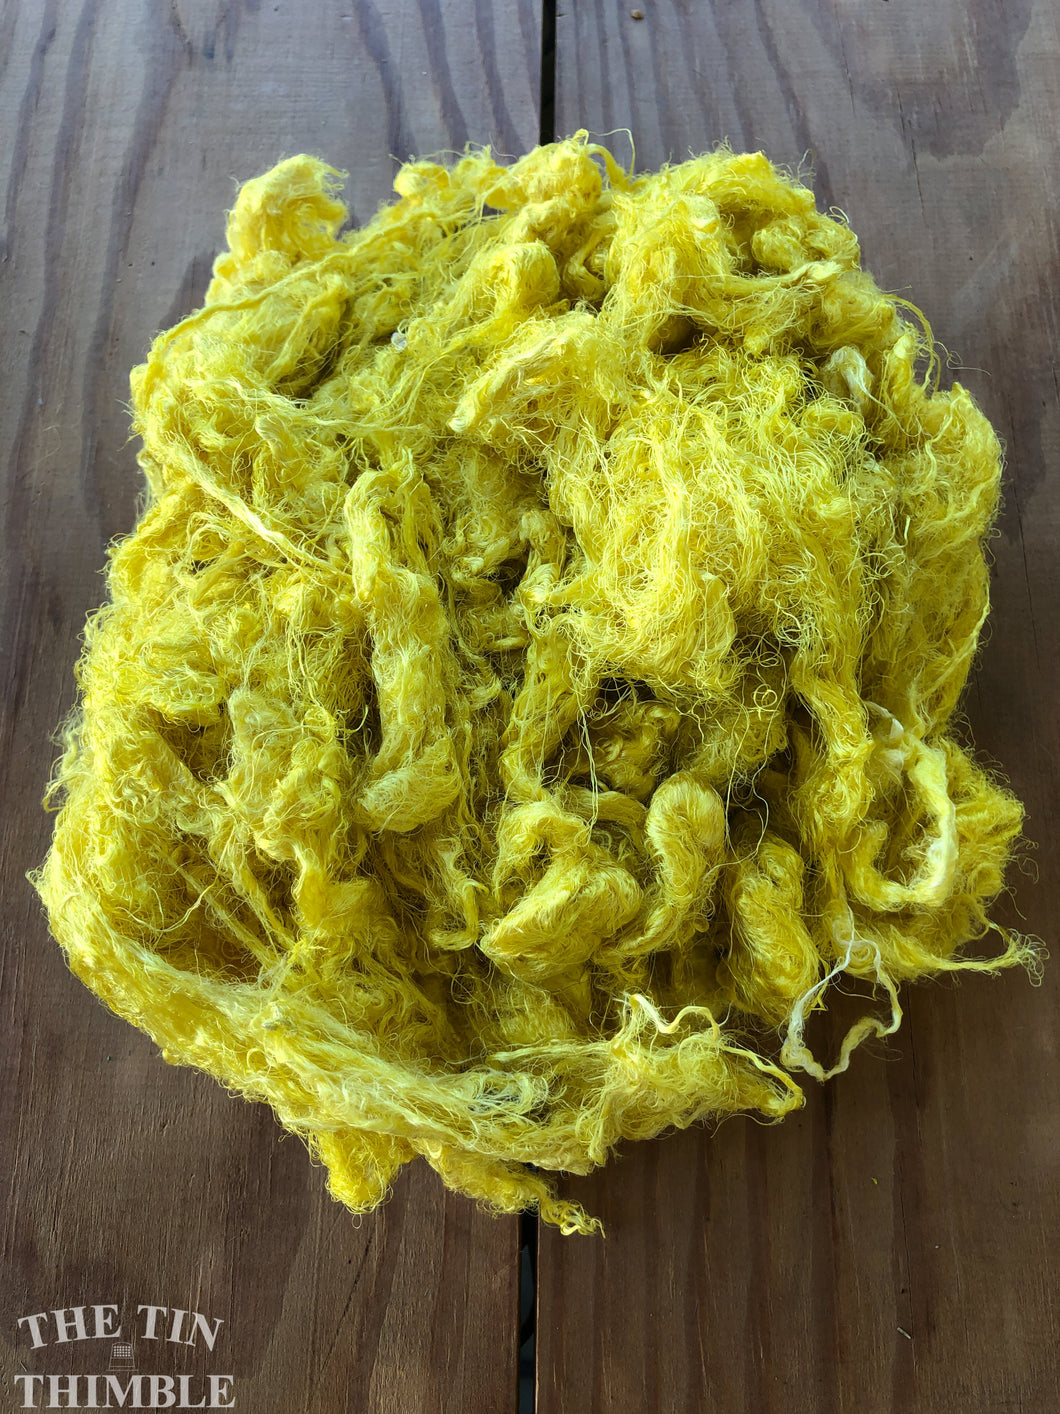 Hand Dyed Throwsters Waste Silk Fiber for Felting, Spinning or Weaving - 1/8 Oz - Bright Yellow